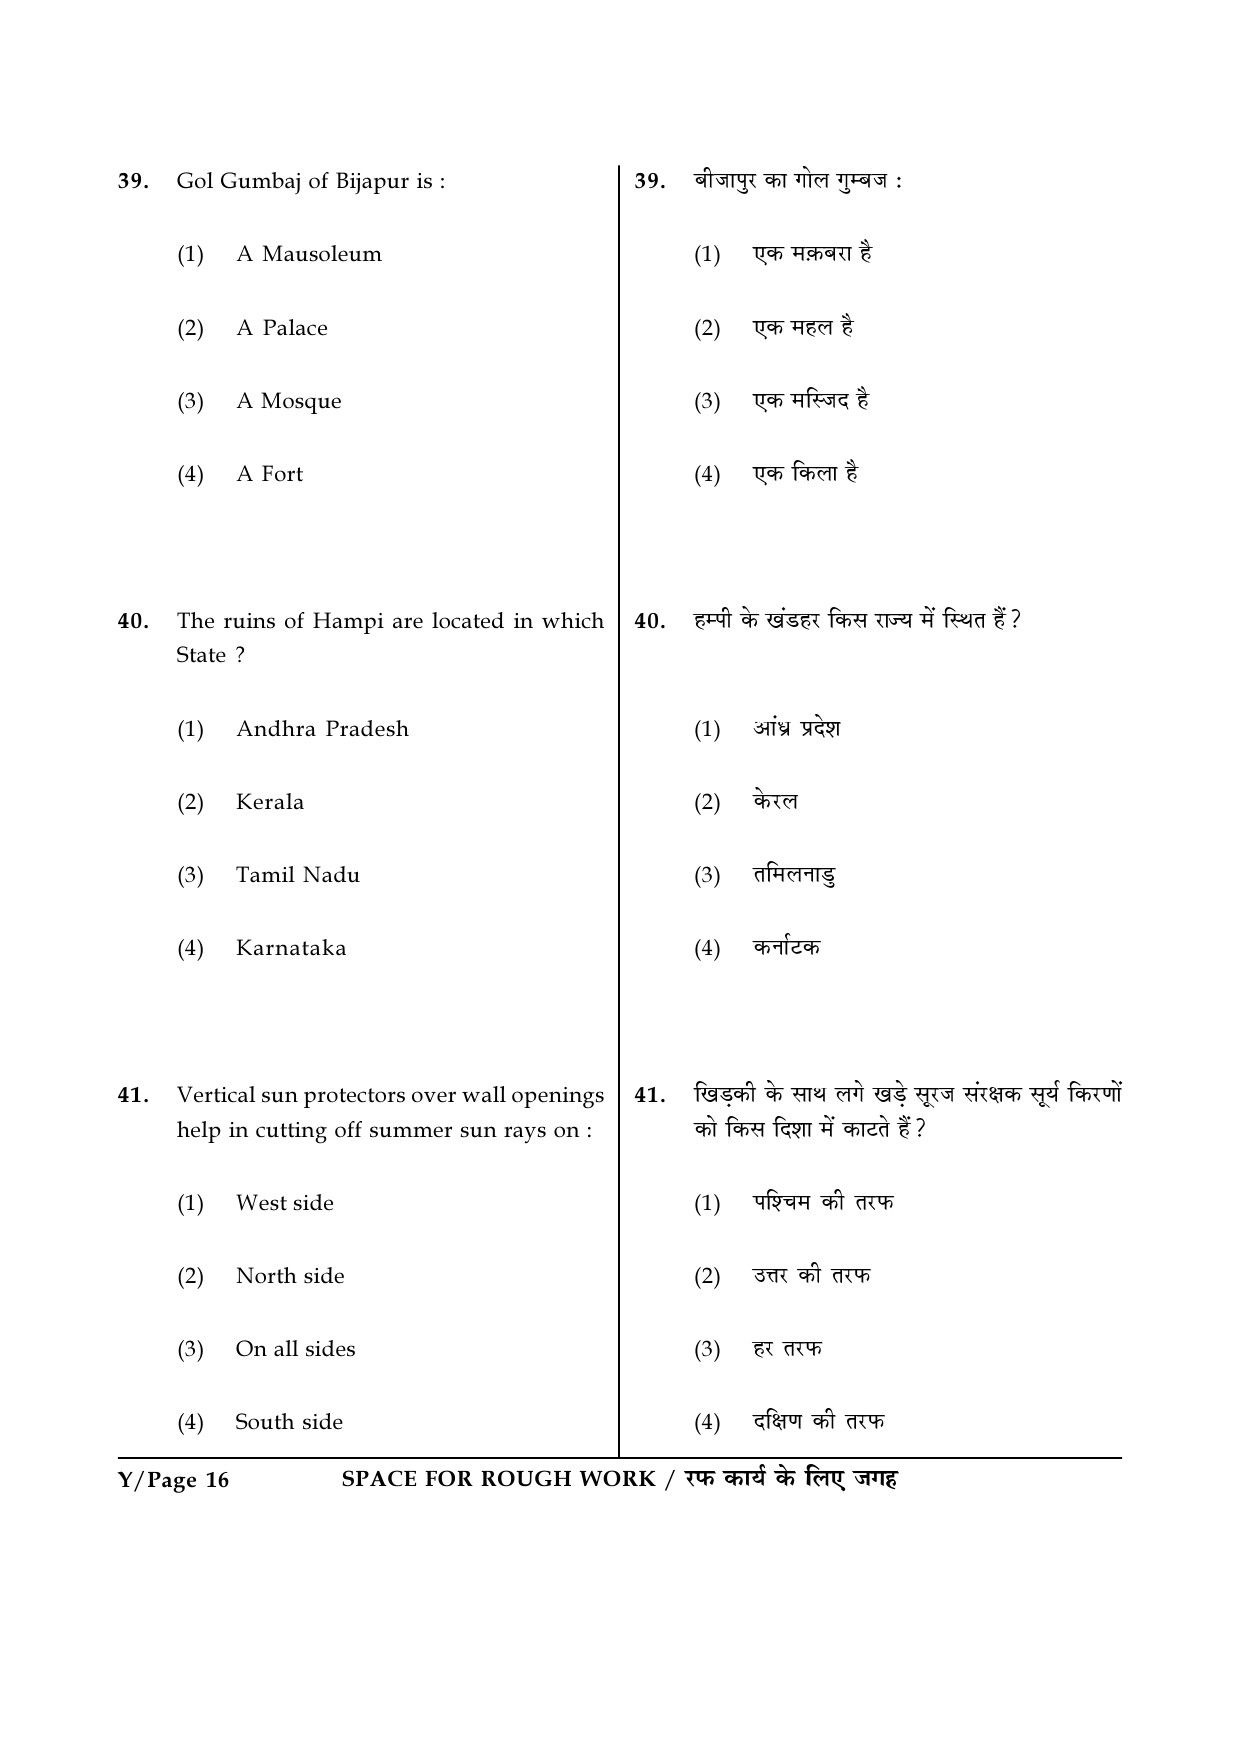 JEE Main Exam Question Paper 2017 Booklet Y 16